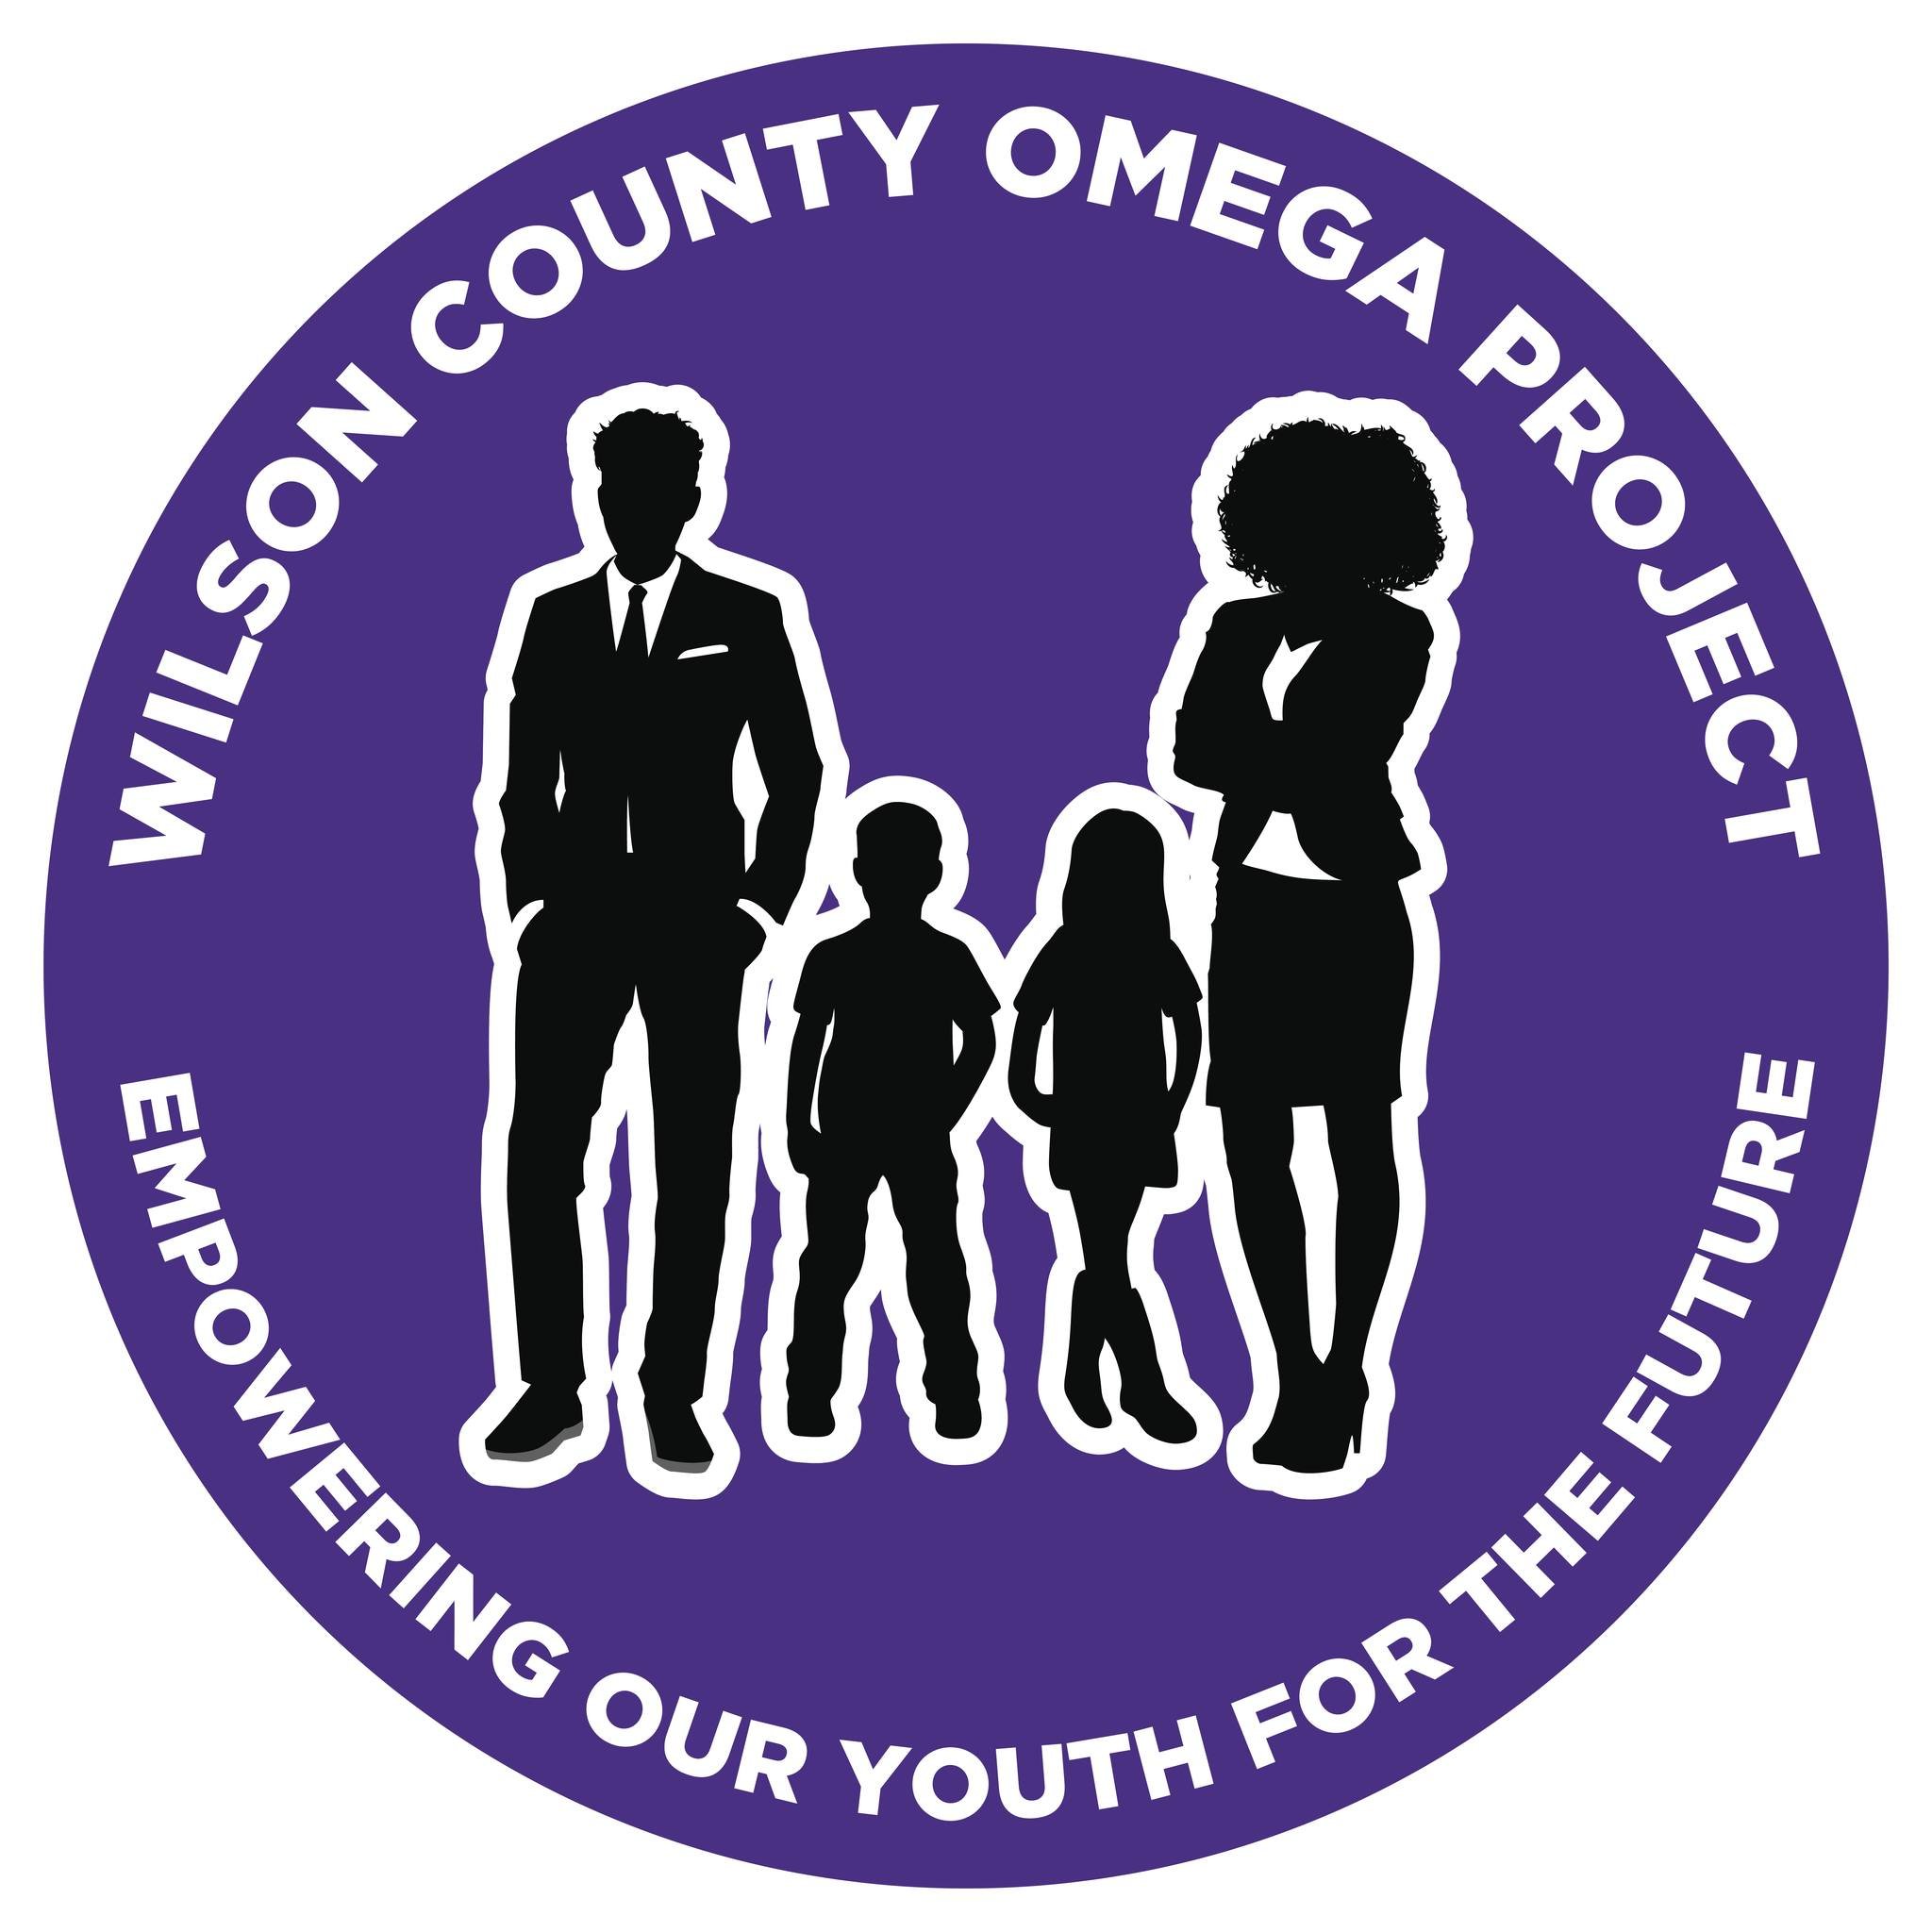 Wilson County Omega Project